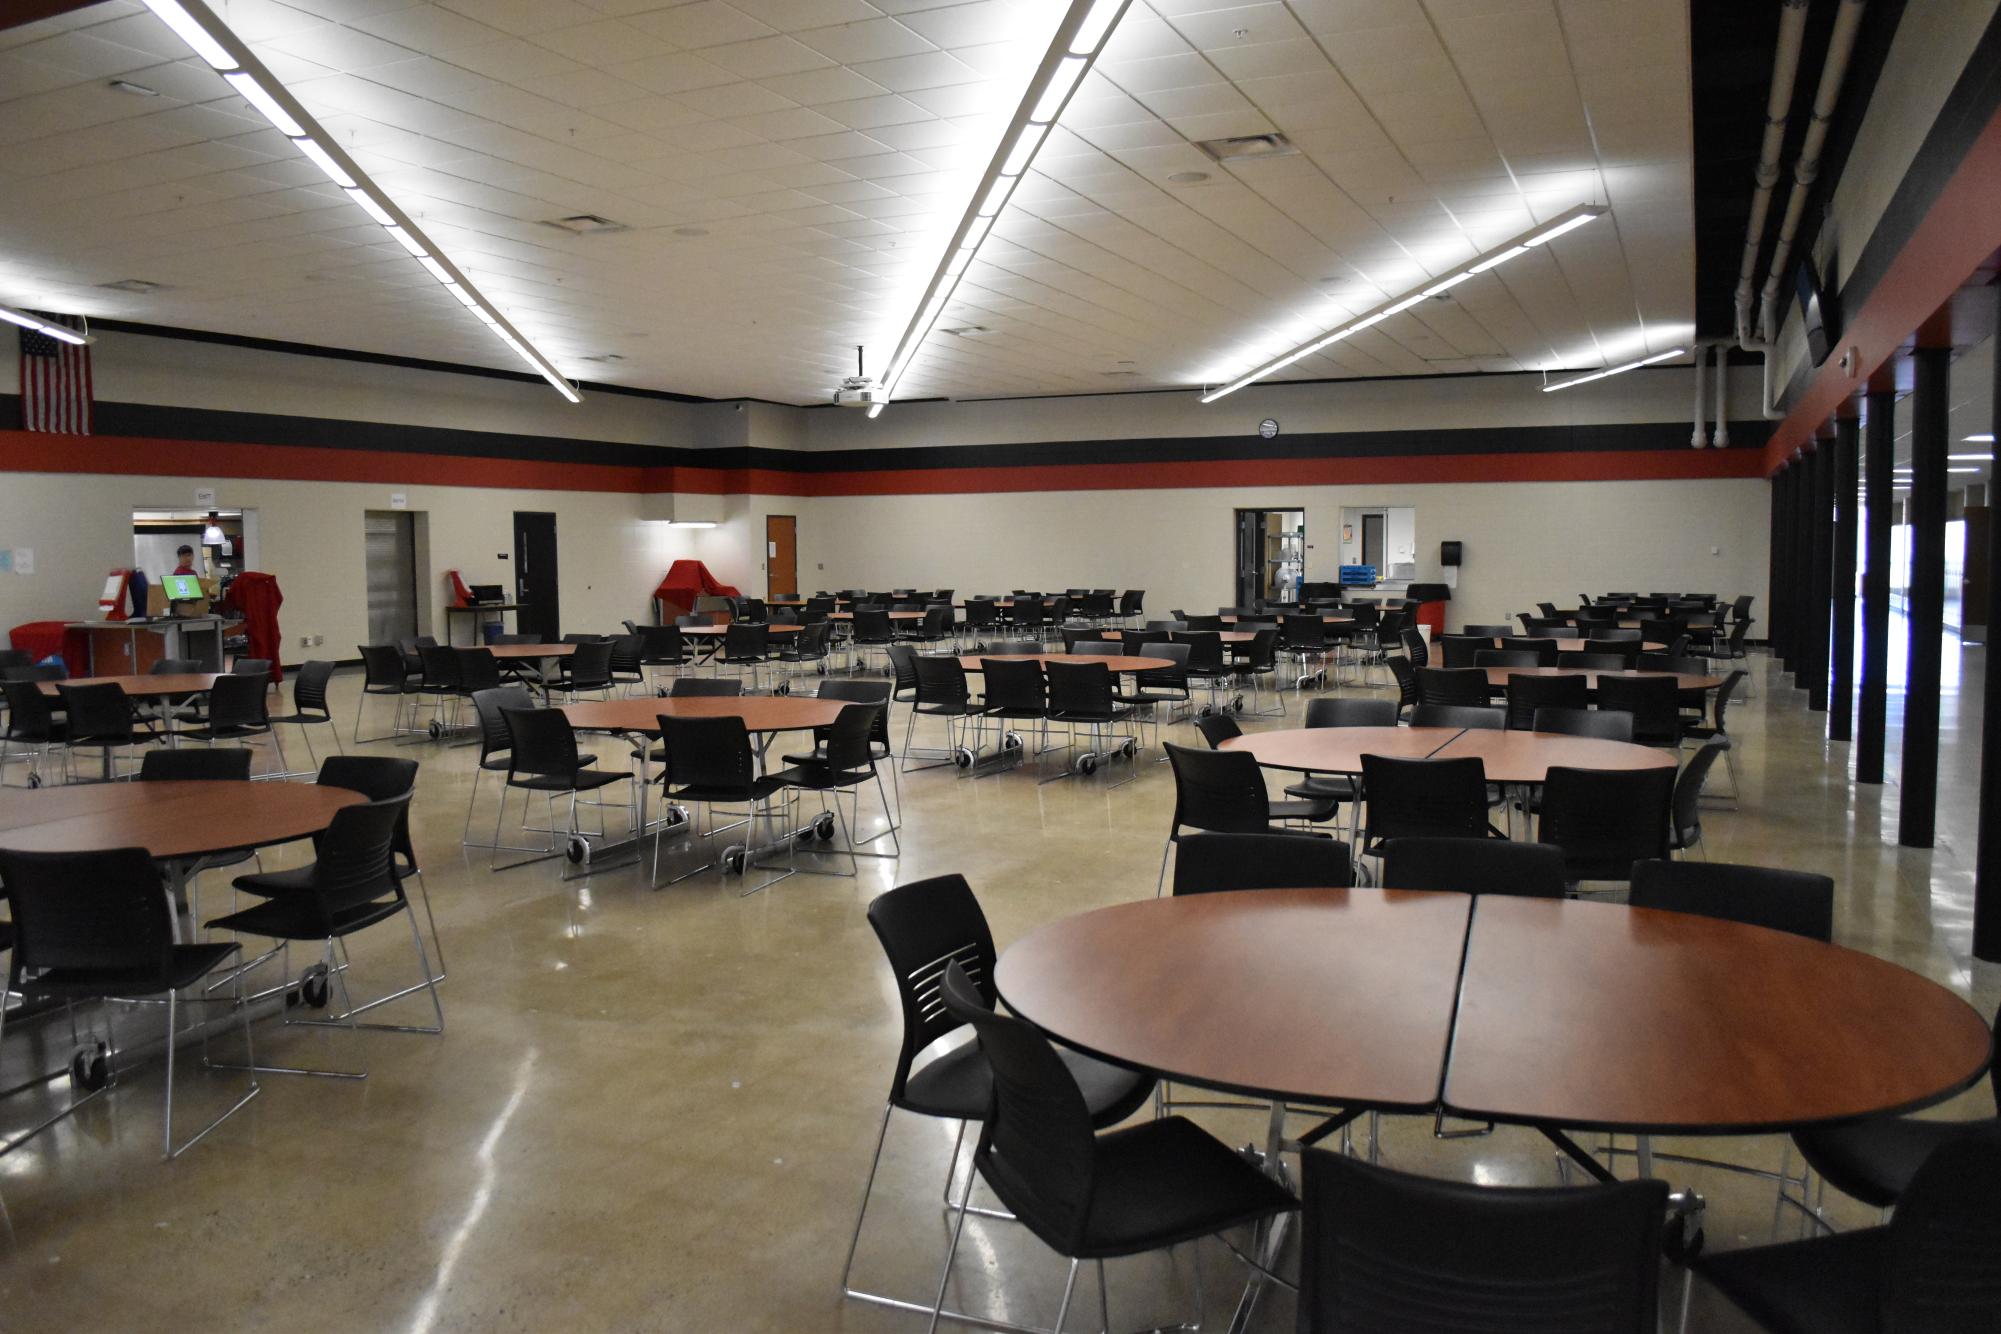 The cafeteria underwent numerous improvements over the summer.